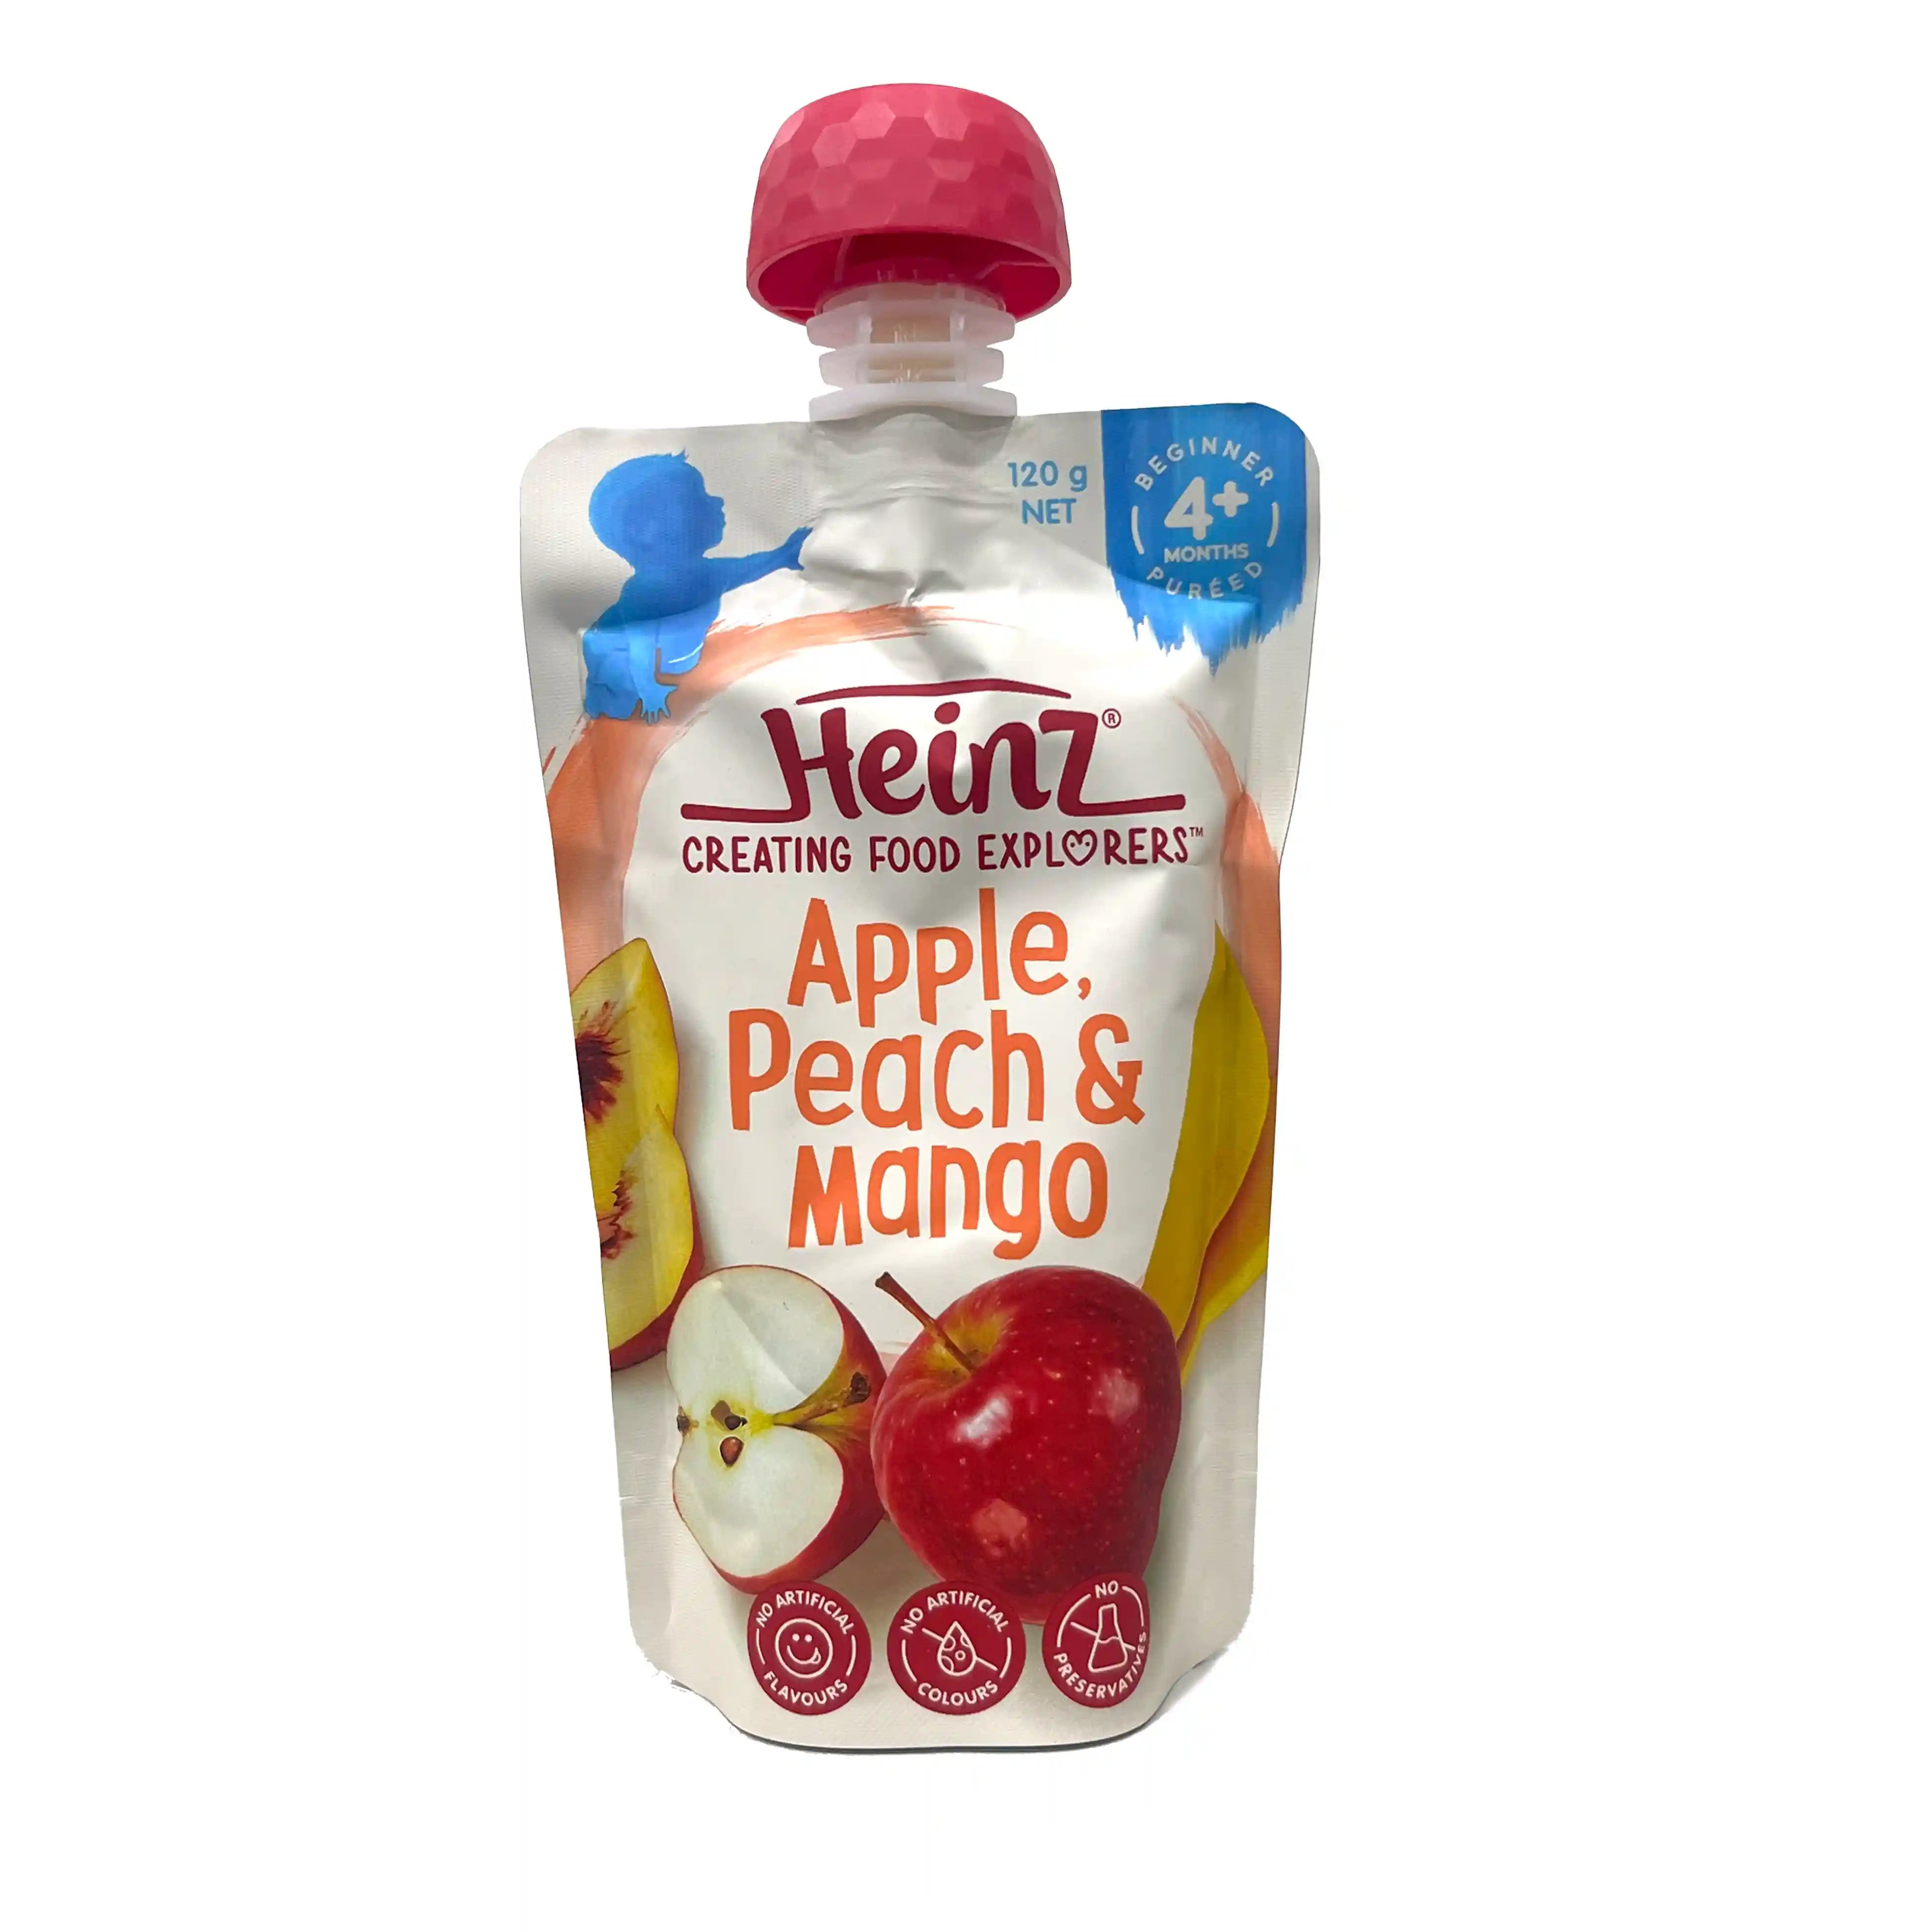 Buy Heinz Puree with Apple, Peach & Mango for your Baby, 4+months, 120gms Online in India at uyyaala.com